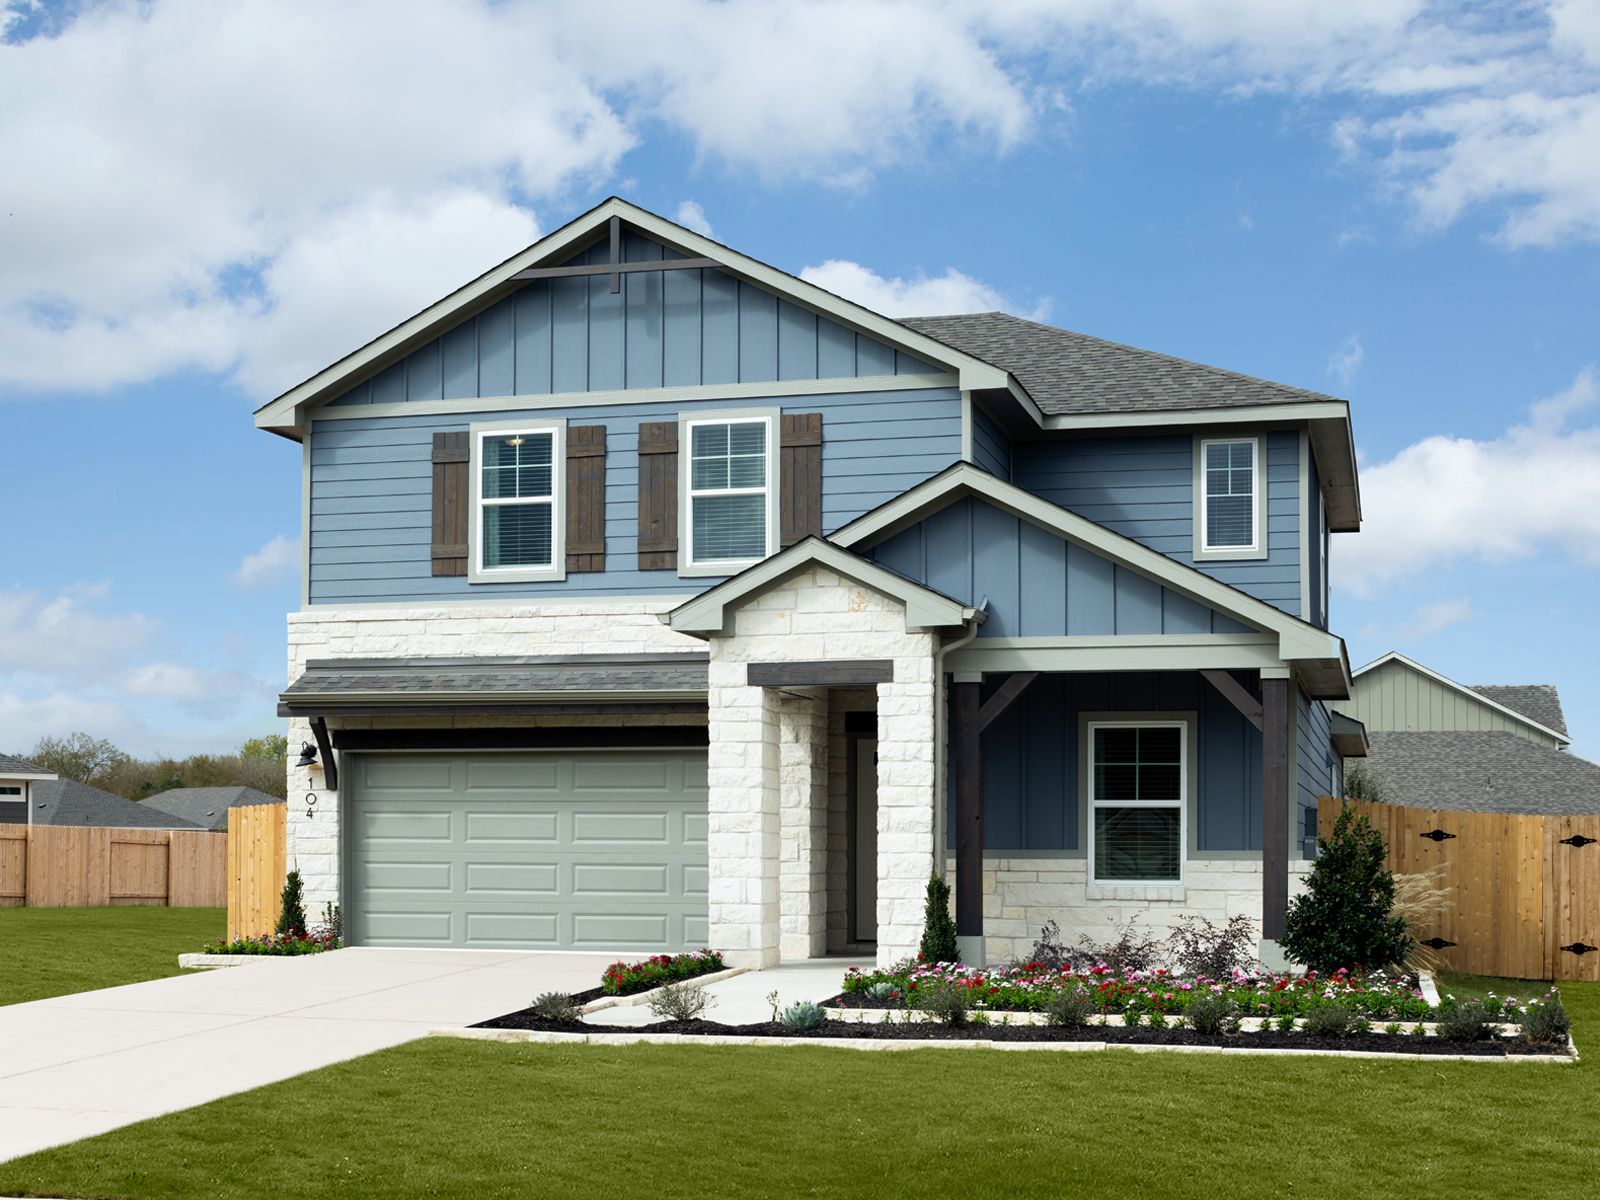 Check out the beautiful Winedale floorplan.